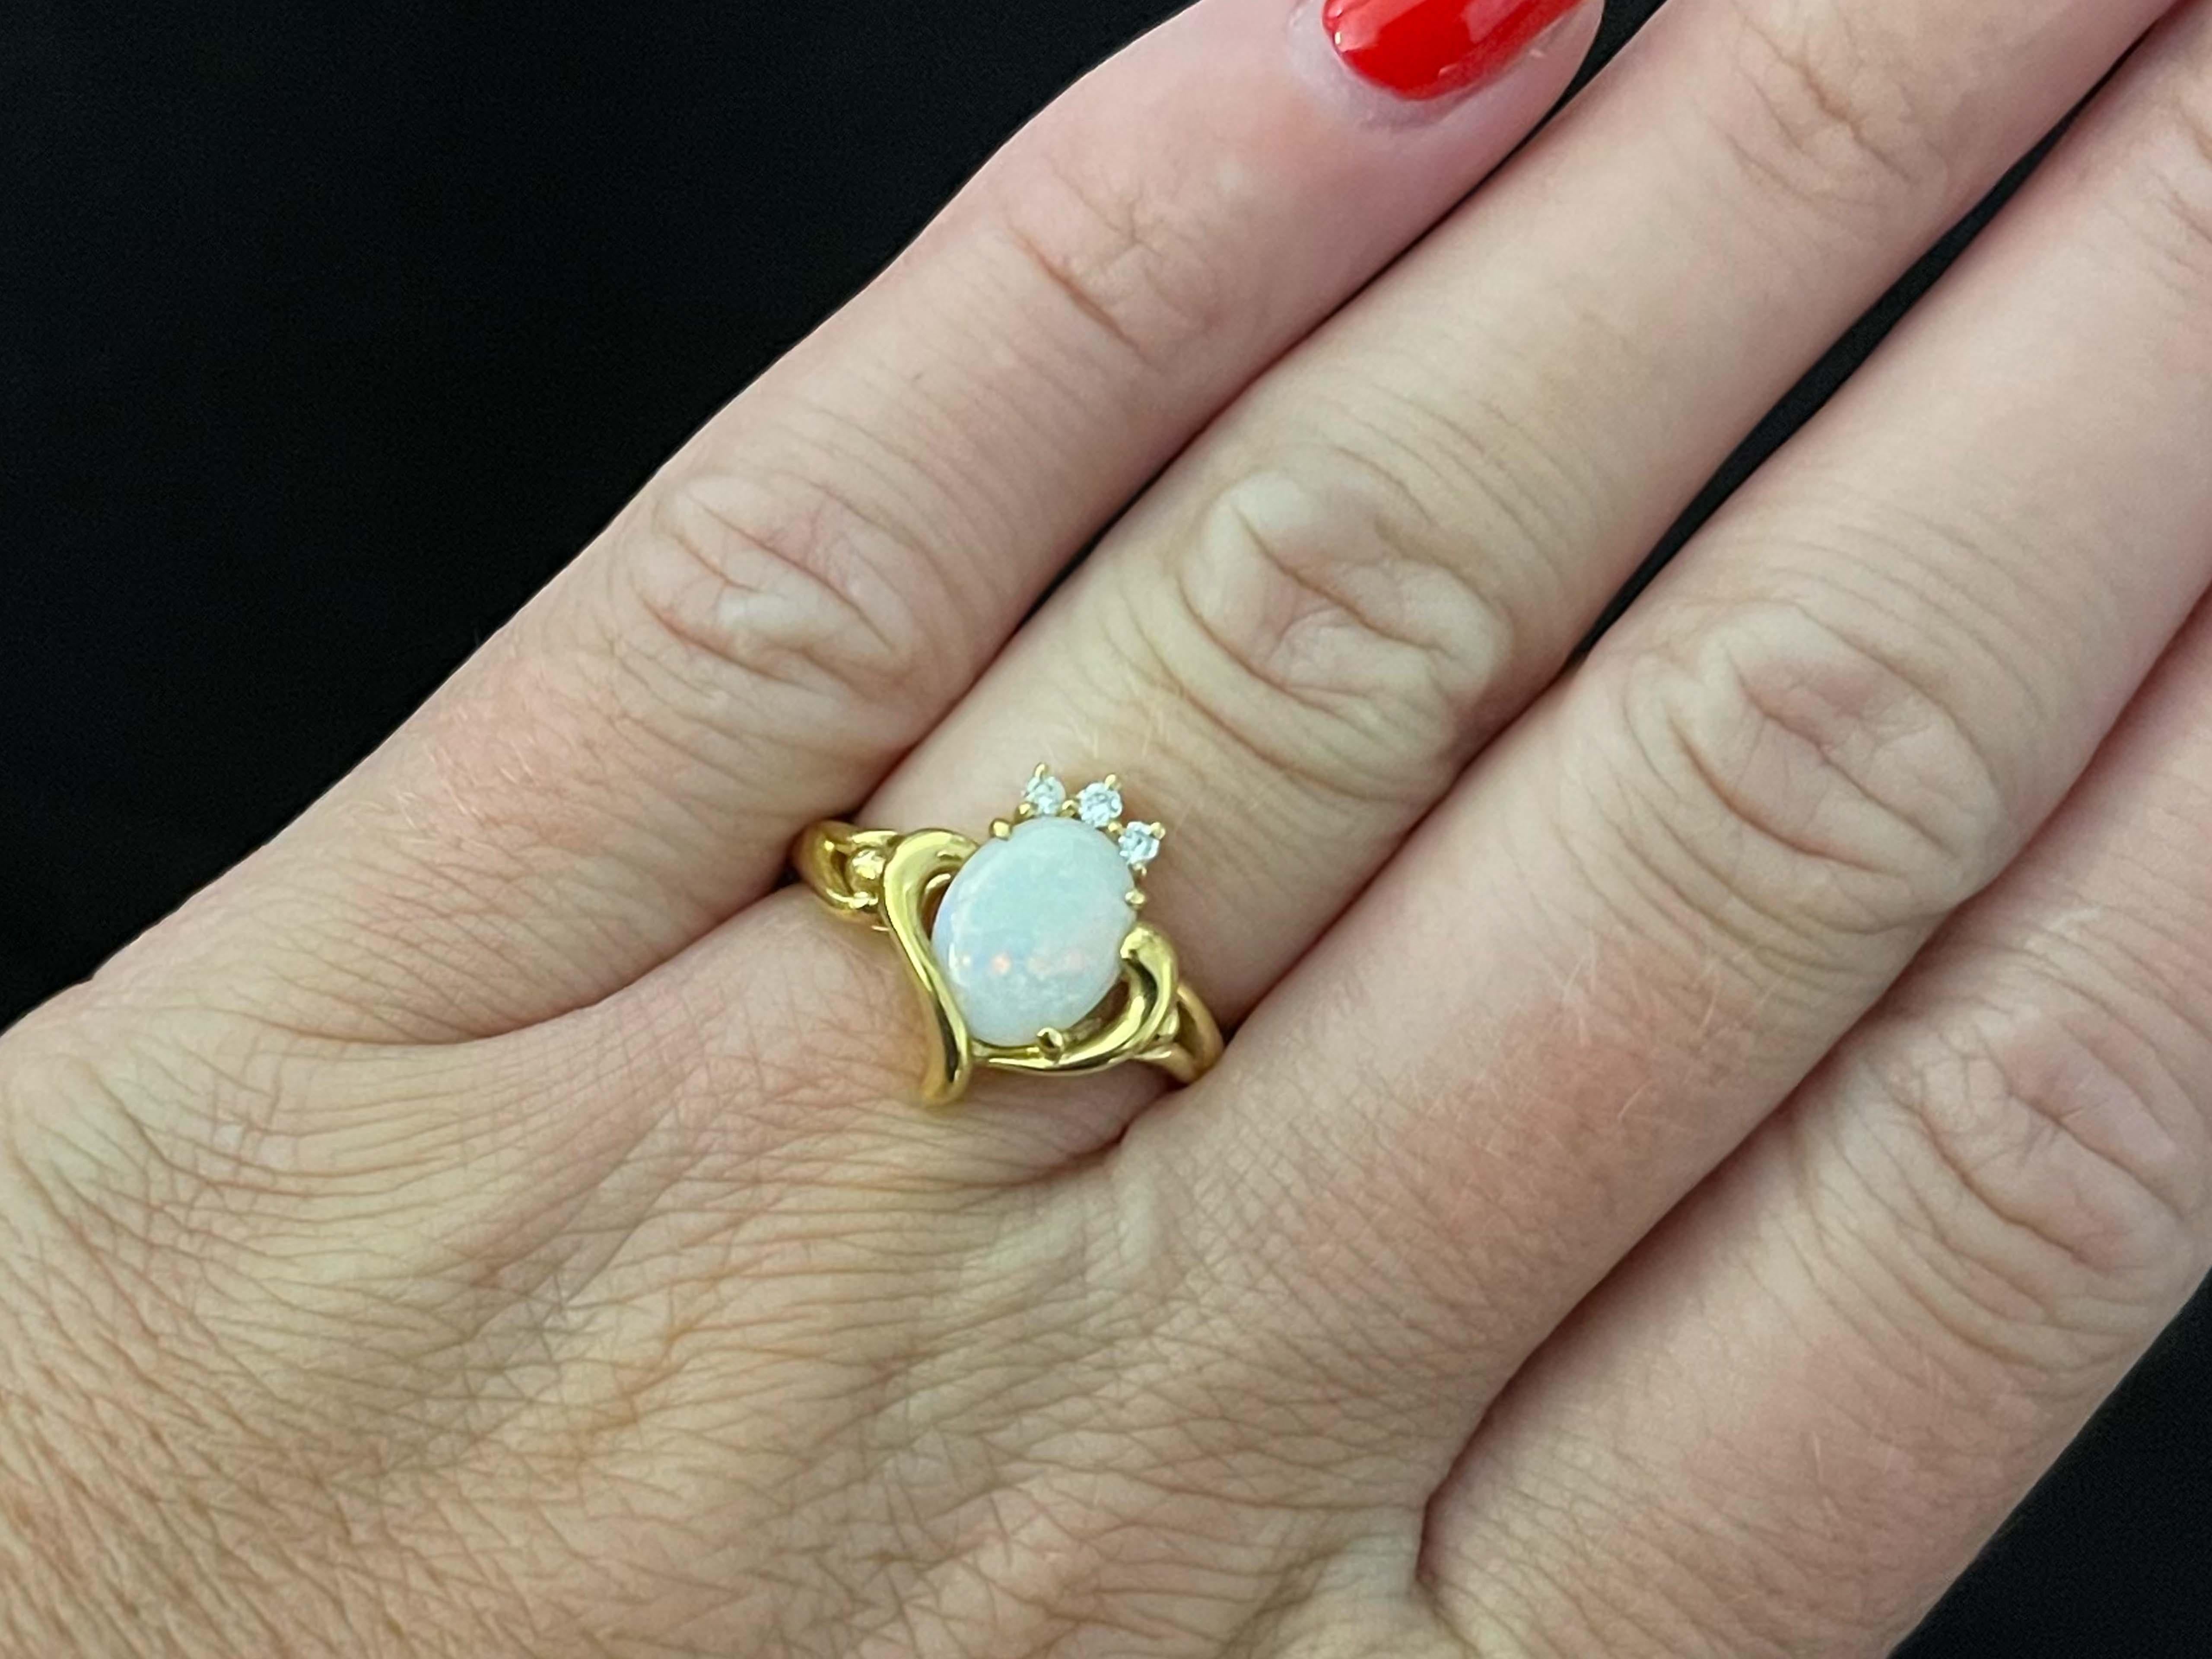 Item Specifications:

Metal: 18K Yellow Gold 

Style: Opal and Diamond Ring

Total Weight: 4.4 Grams

Ring Size: 6 (resizable)

Gemstone Specifications:

Center Gemstone: Opal

Gemstone Measurements: 9.2 mm x 7.3 mm x 2.3 mm

Gemstone Carat Weight: